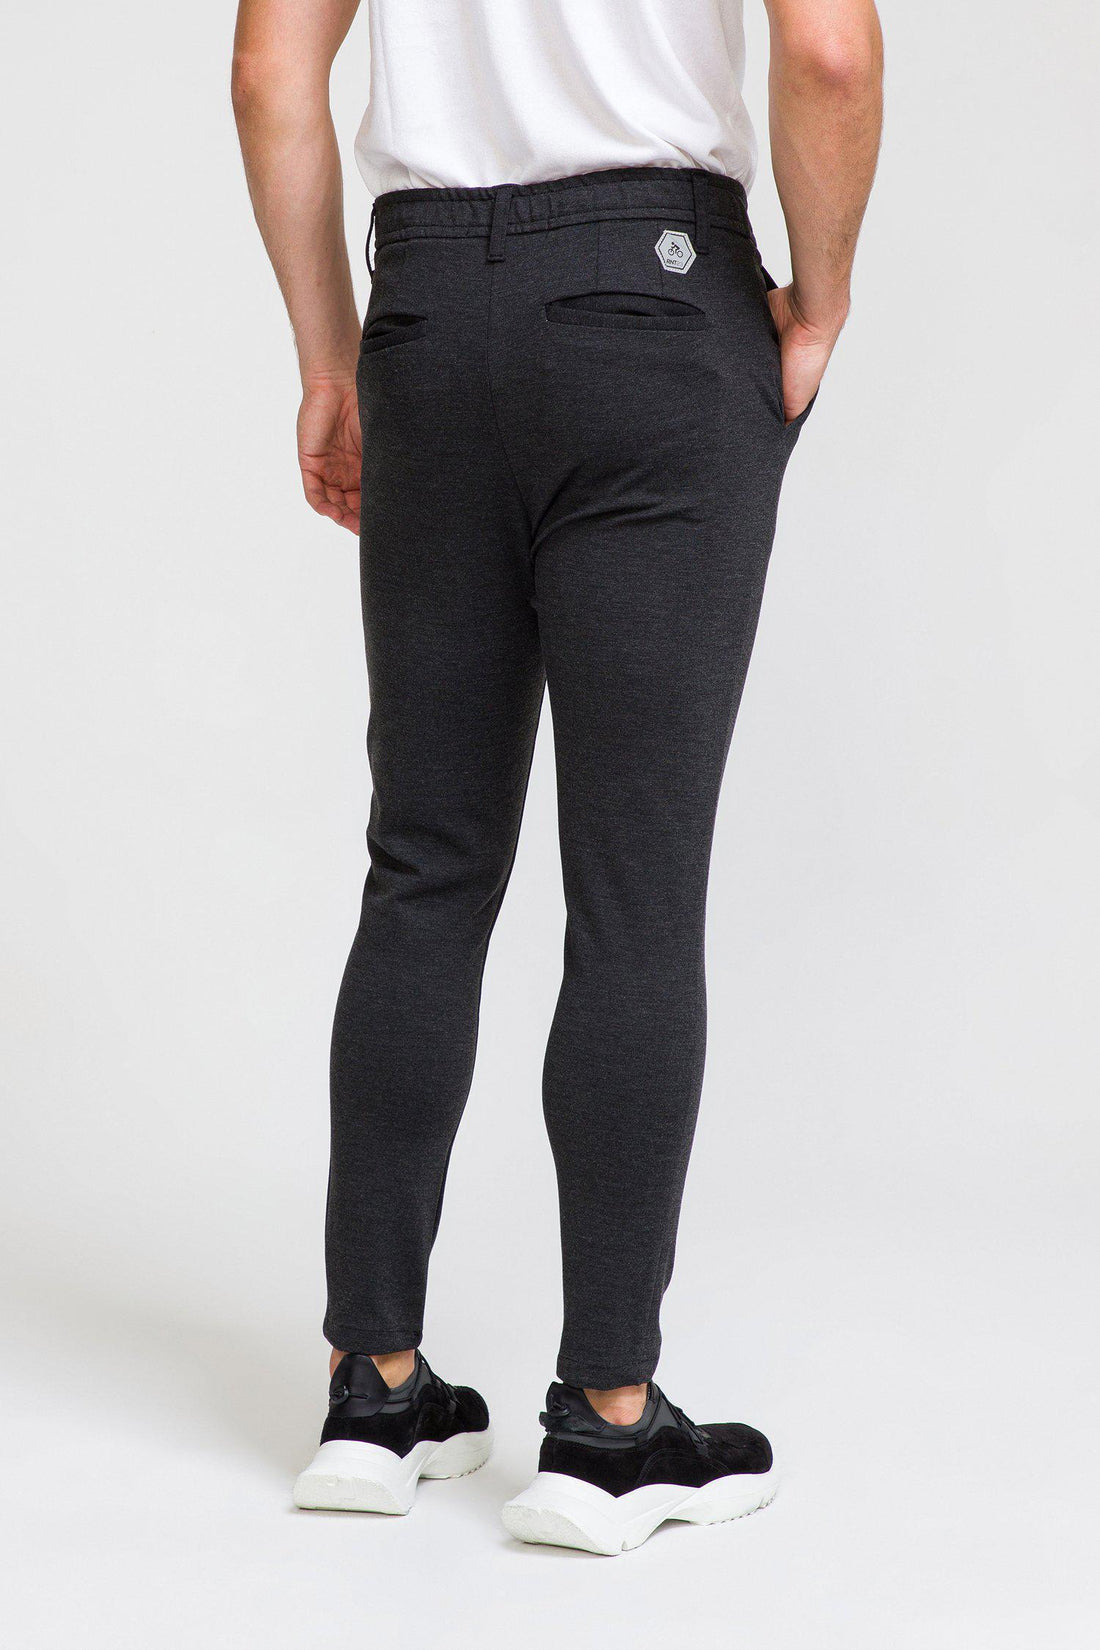 Commuter Casual Trouser - ANTHRACITE - Ron Tomson